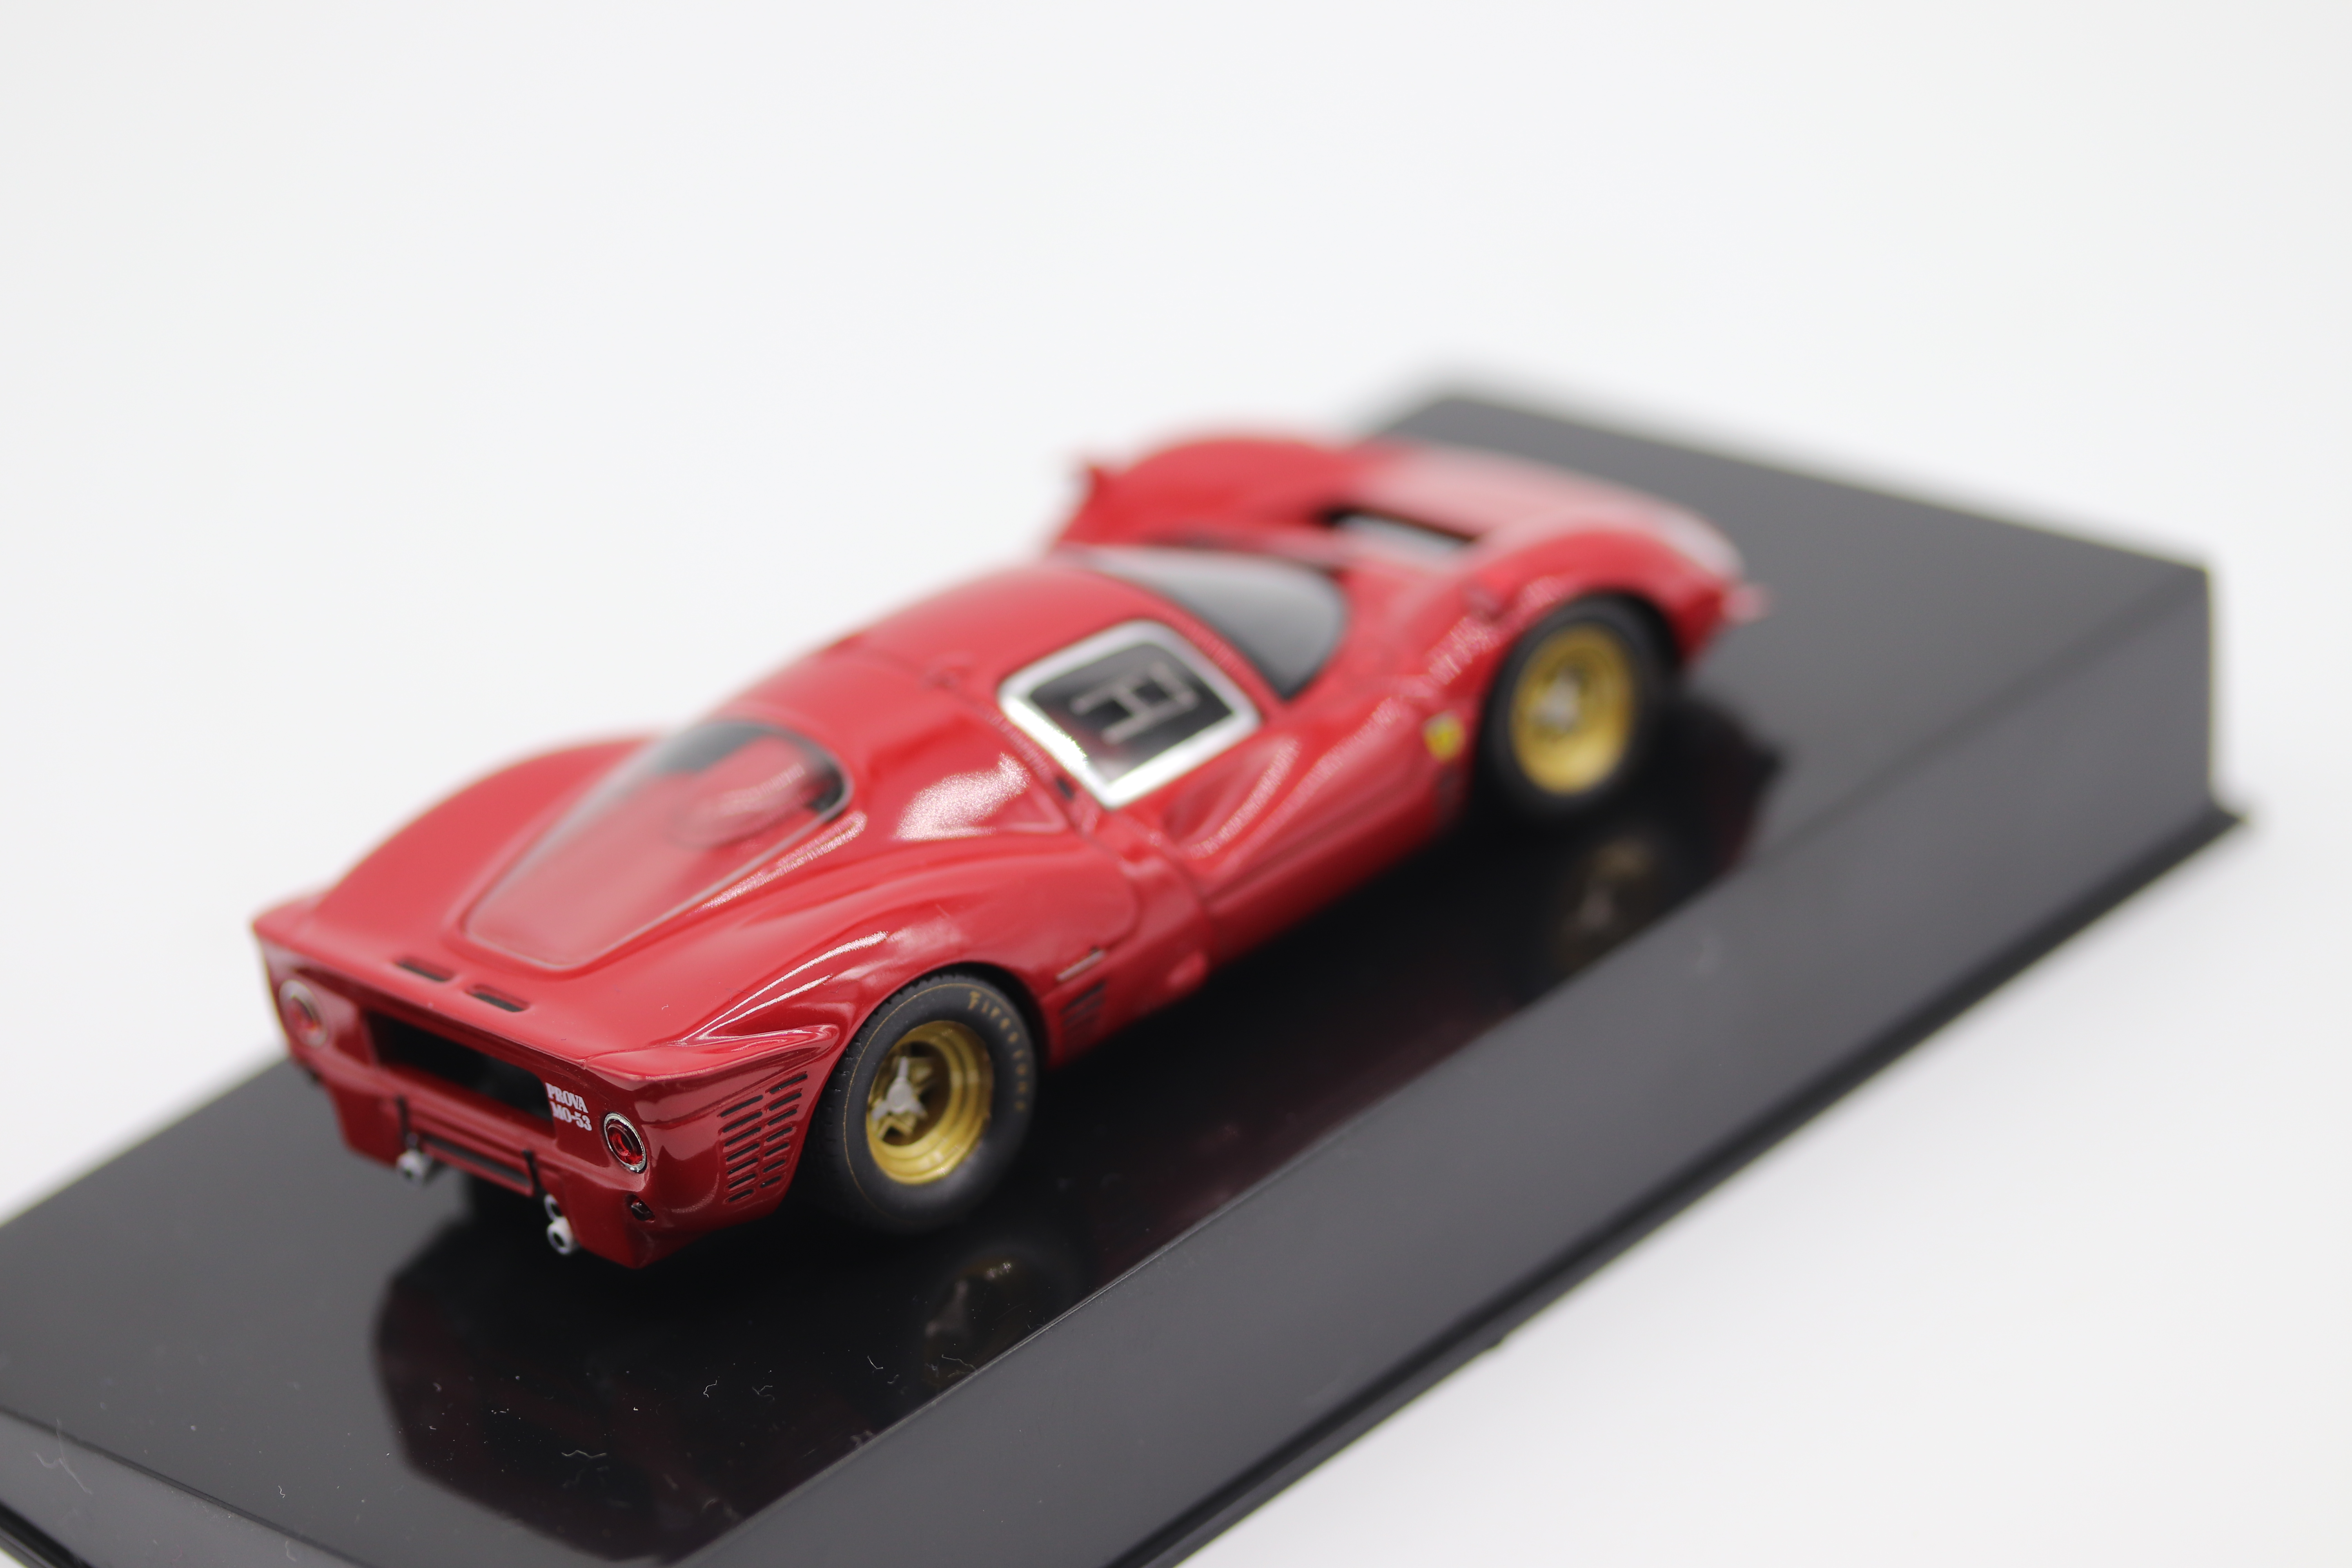 HOTWHEELS ELITE 1.43 FERRARI 330 P4 1967 Red color with gold color ...